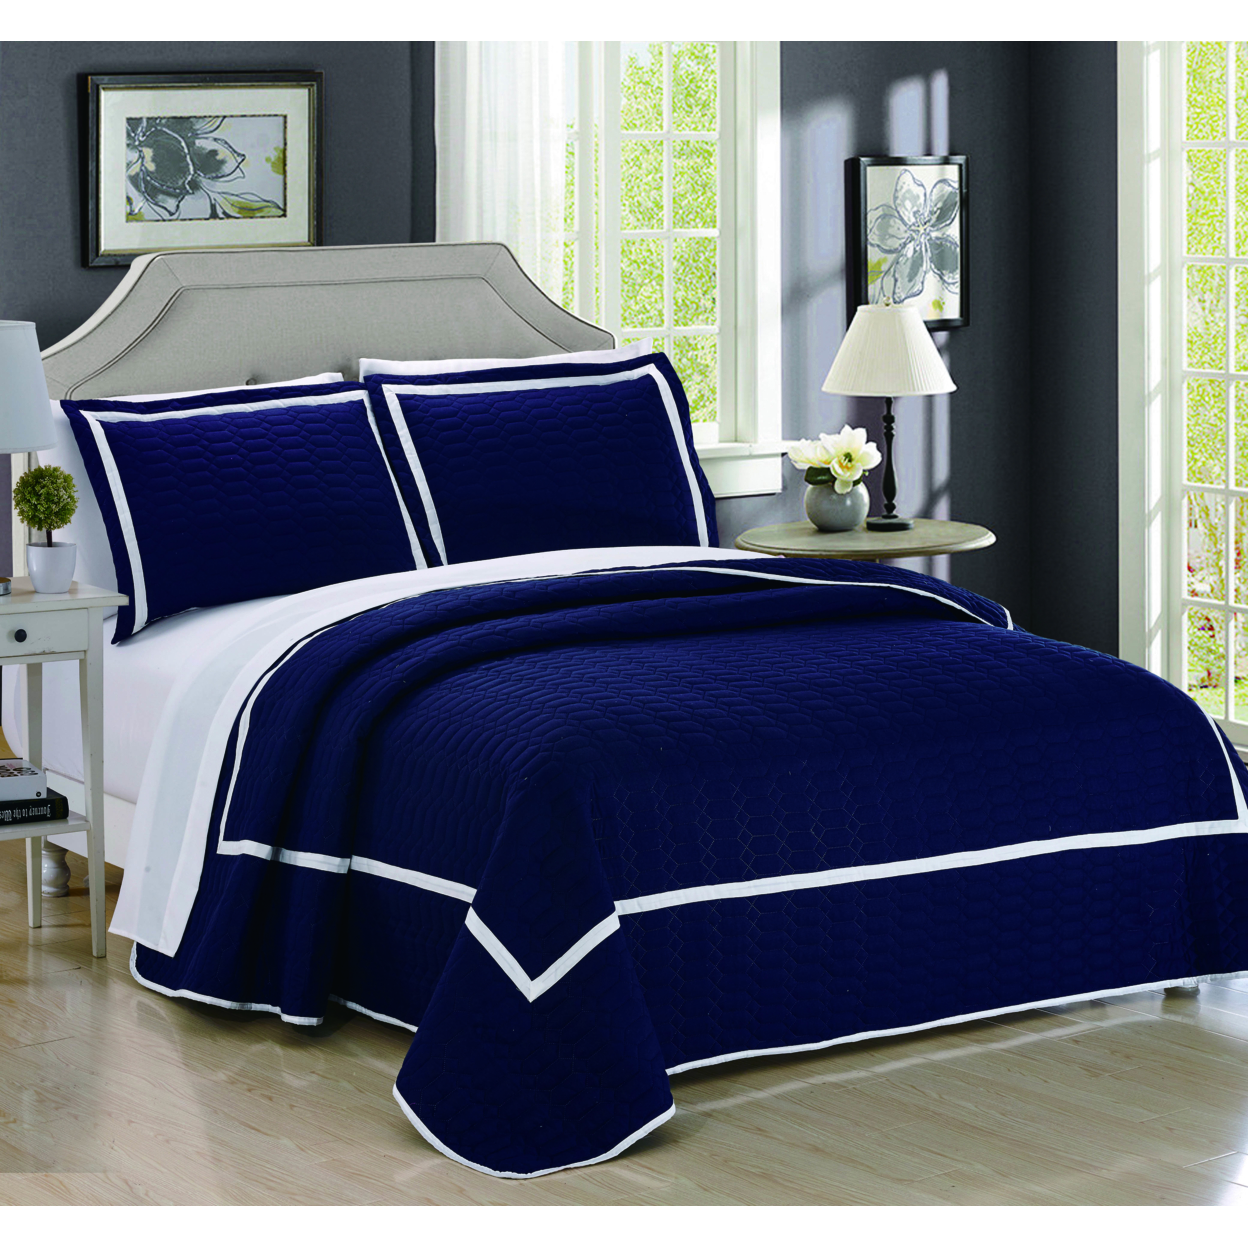 3 Or 2 Piece Halrowe Hotel Collection 2 Tone Banded Quilted Geometrical Embroidered Quilt Set - Navy, Twin